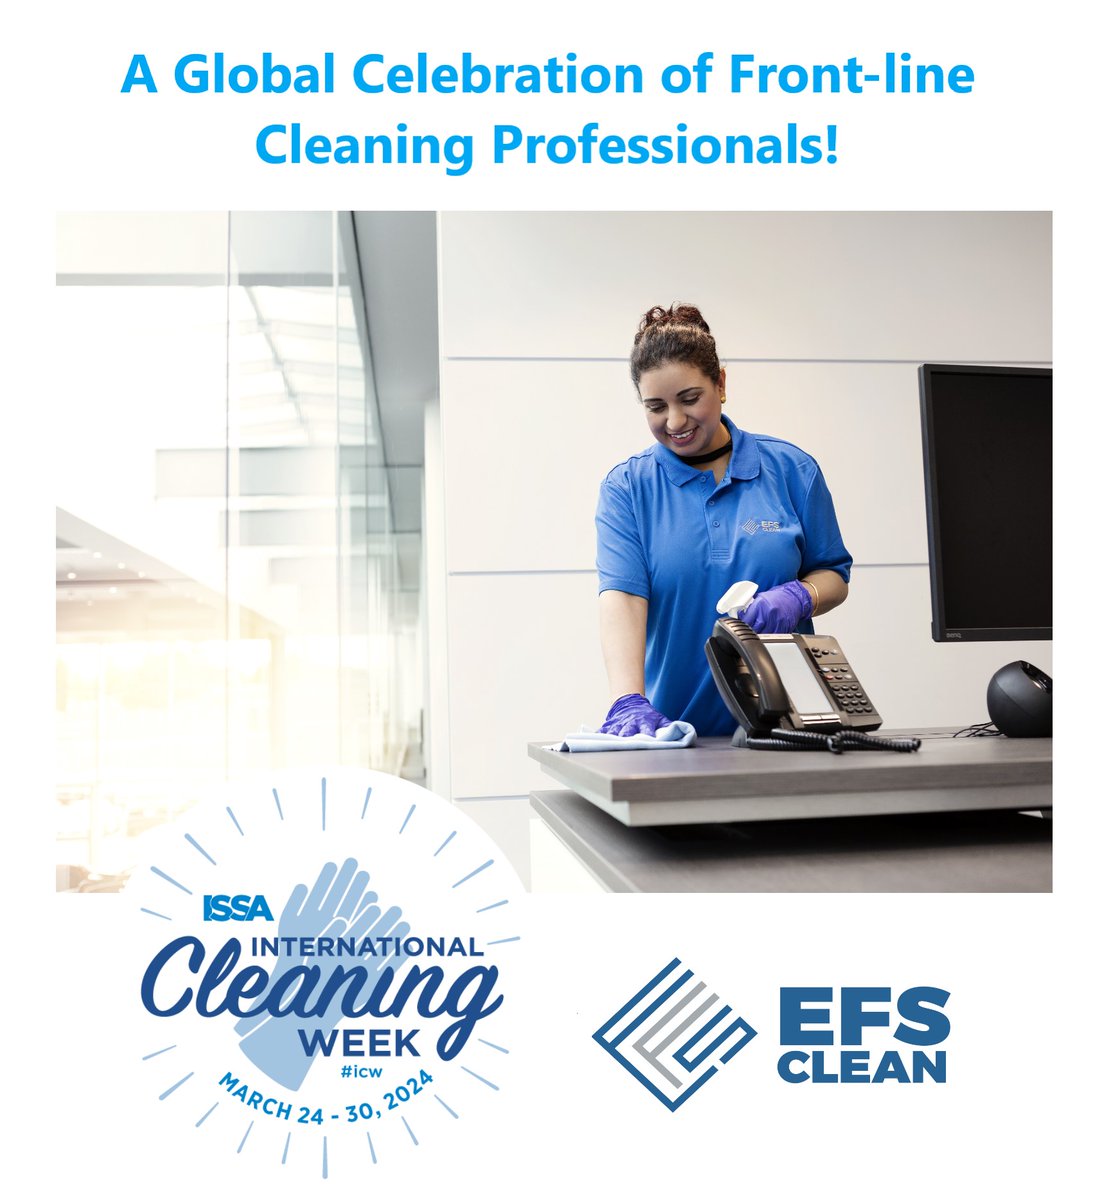 International Cleaning Week! Let's all celebrate and honor our essential cleaning professionals, and all they do. #ICW #Calgary #cleaningservices